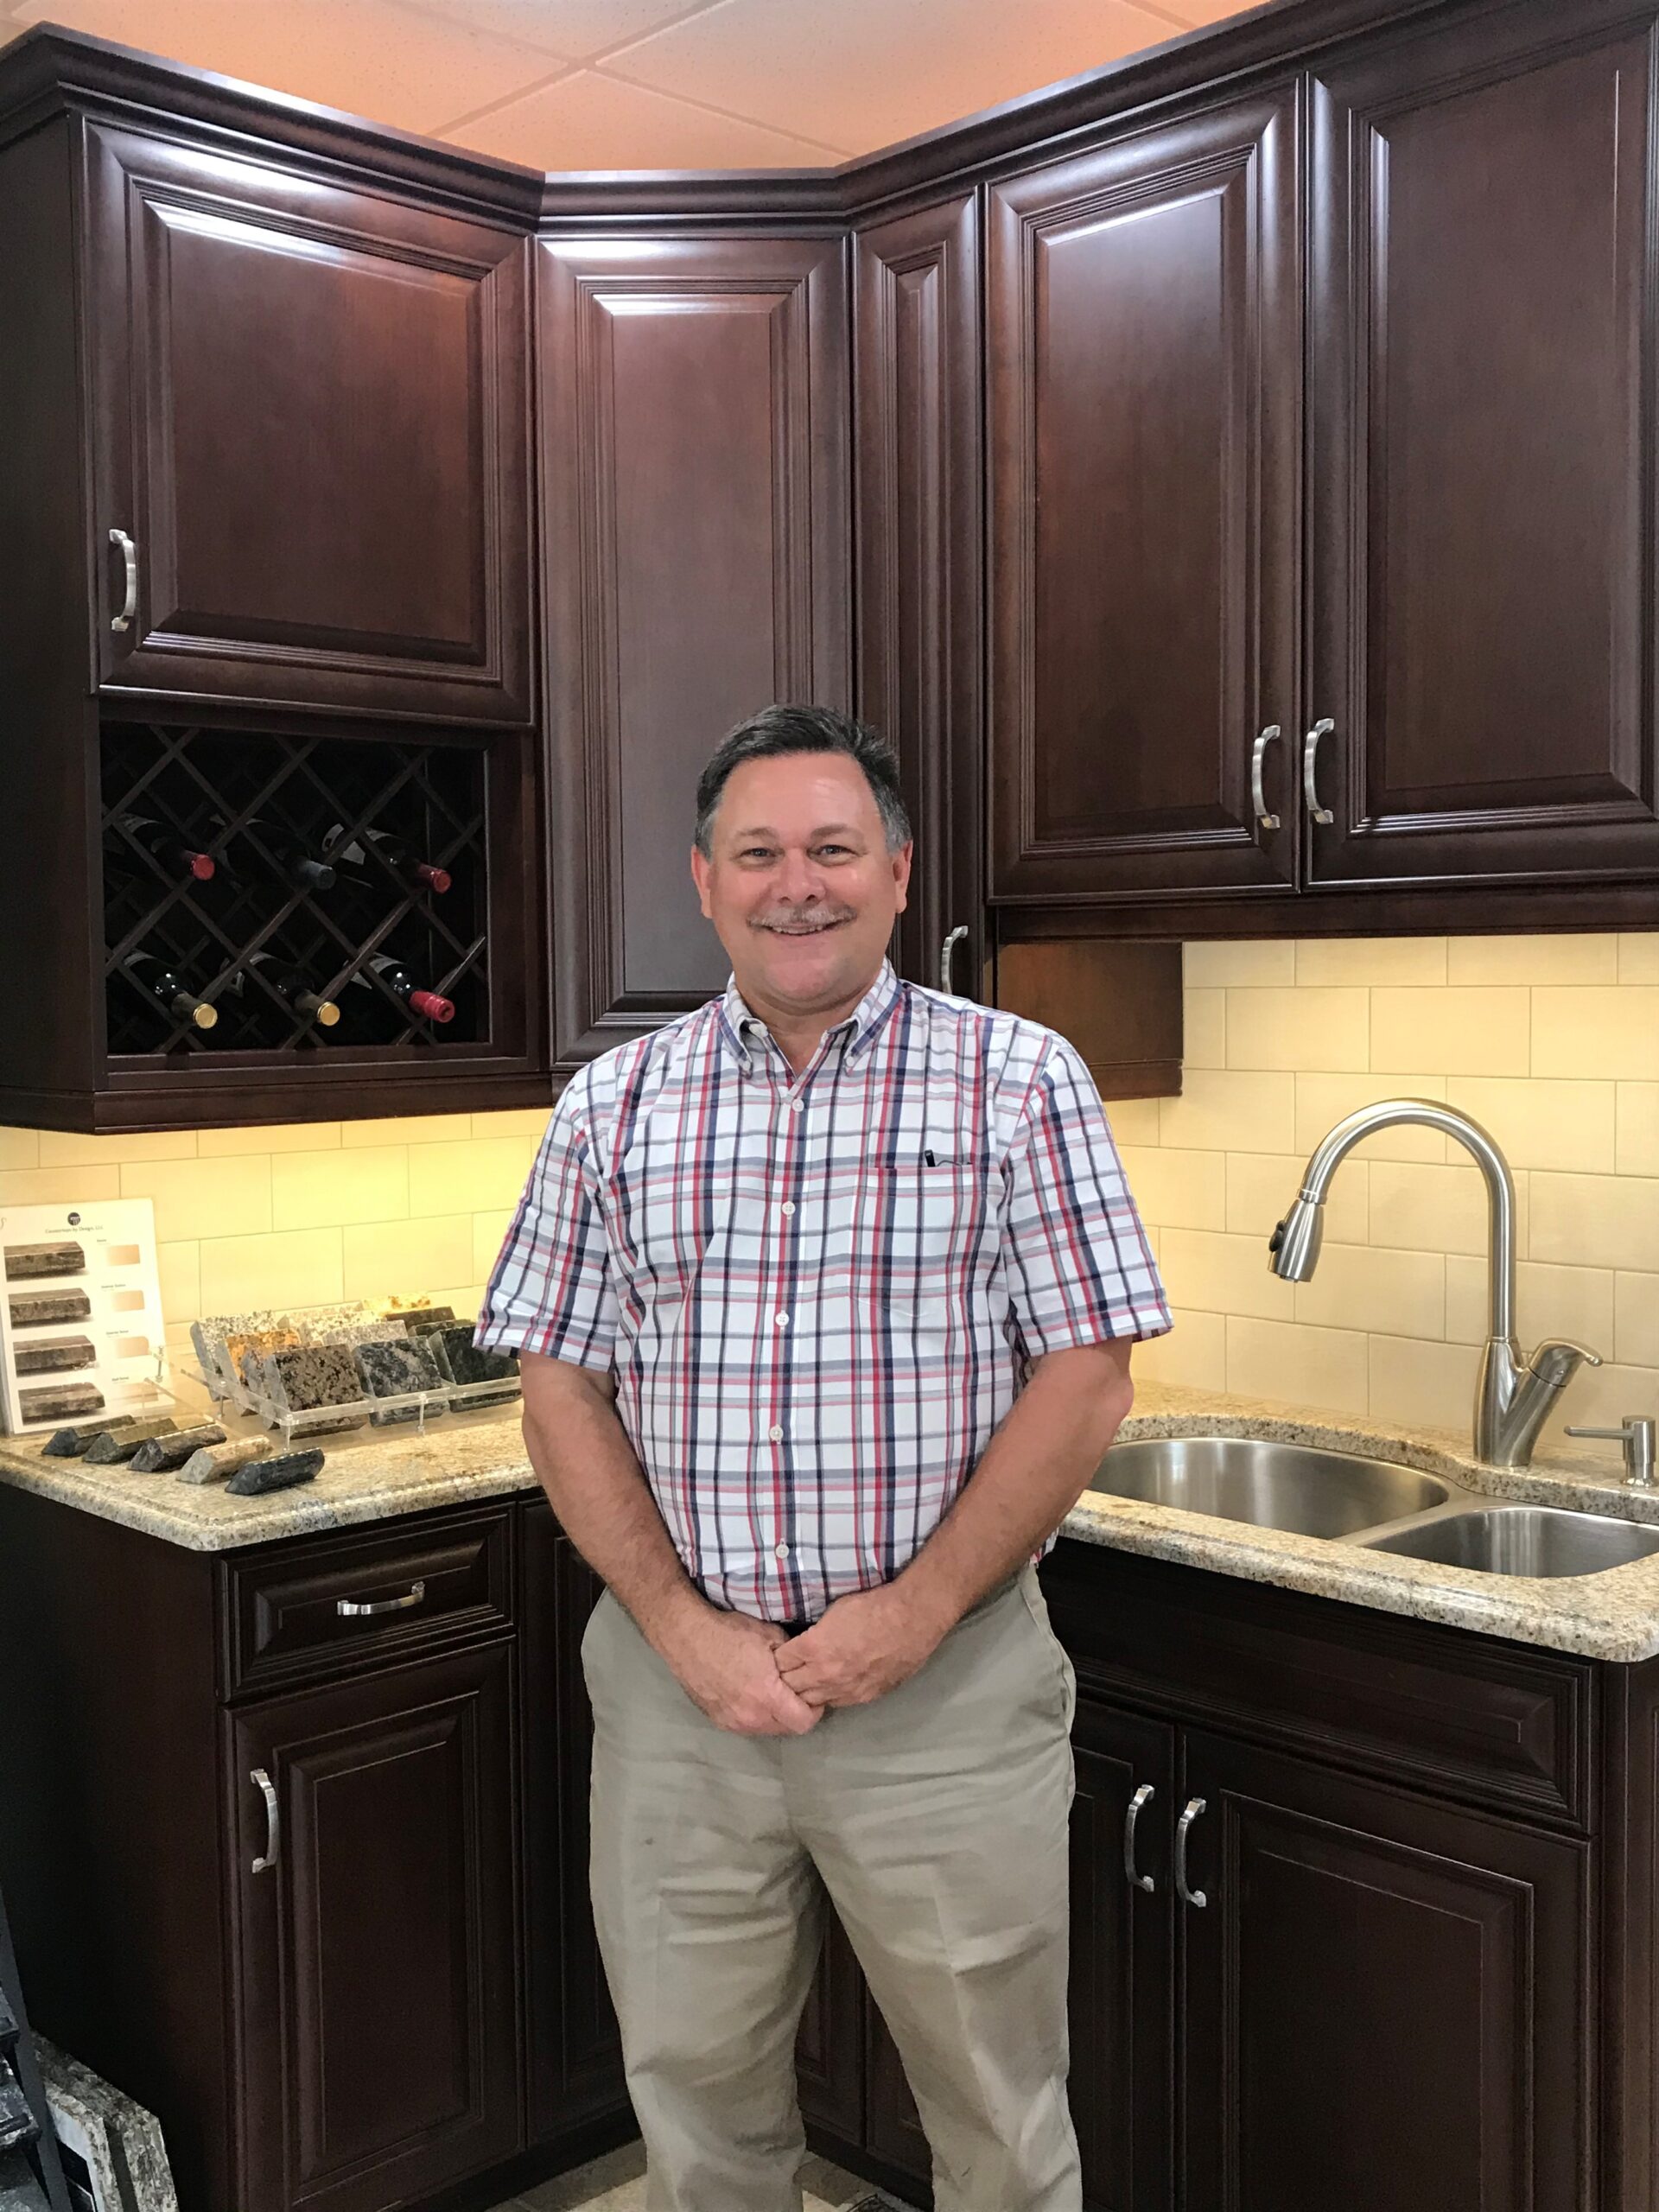  Owner Image of Raleigh Kitchen Solvers